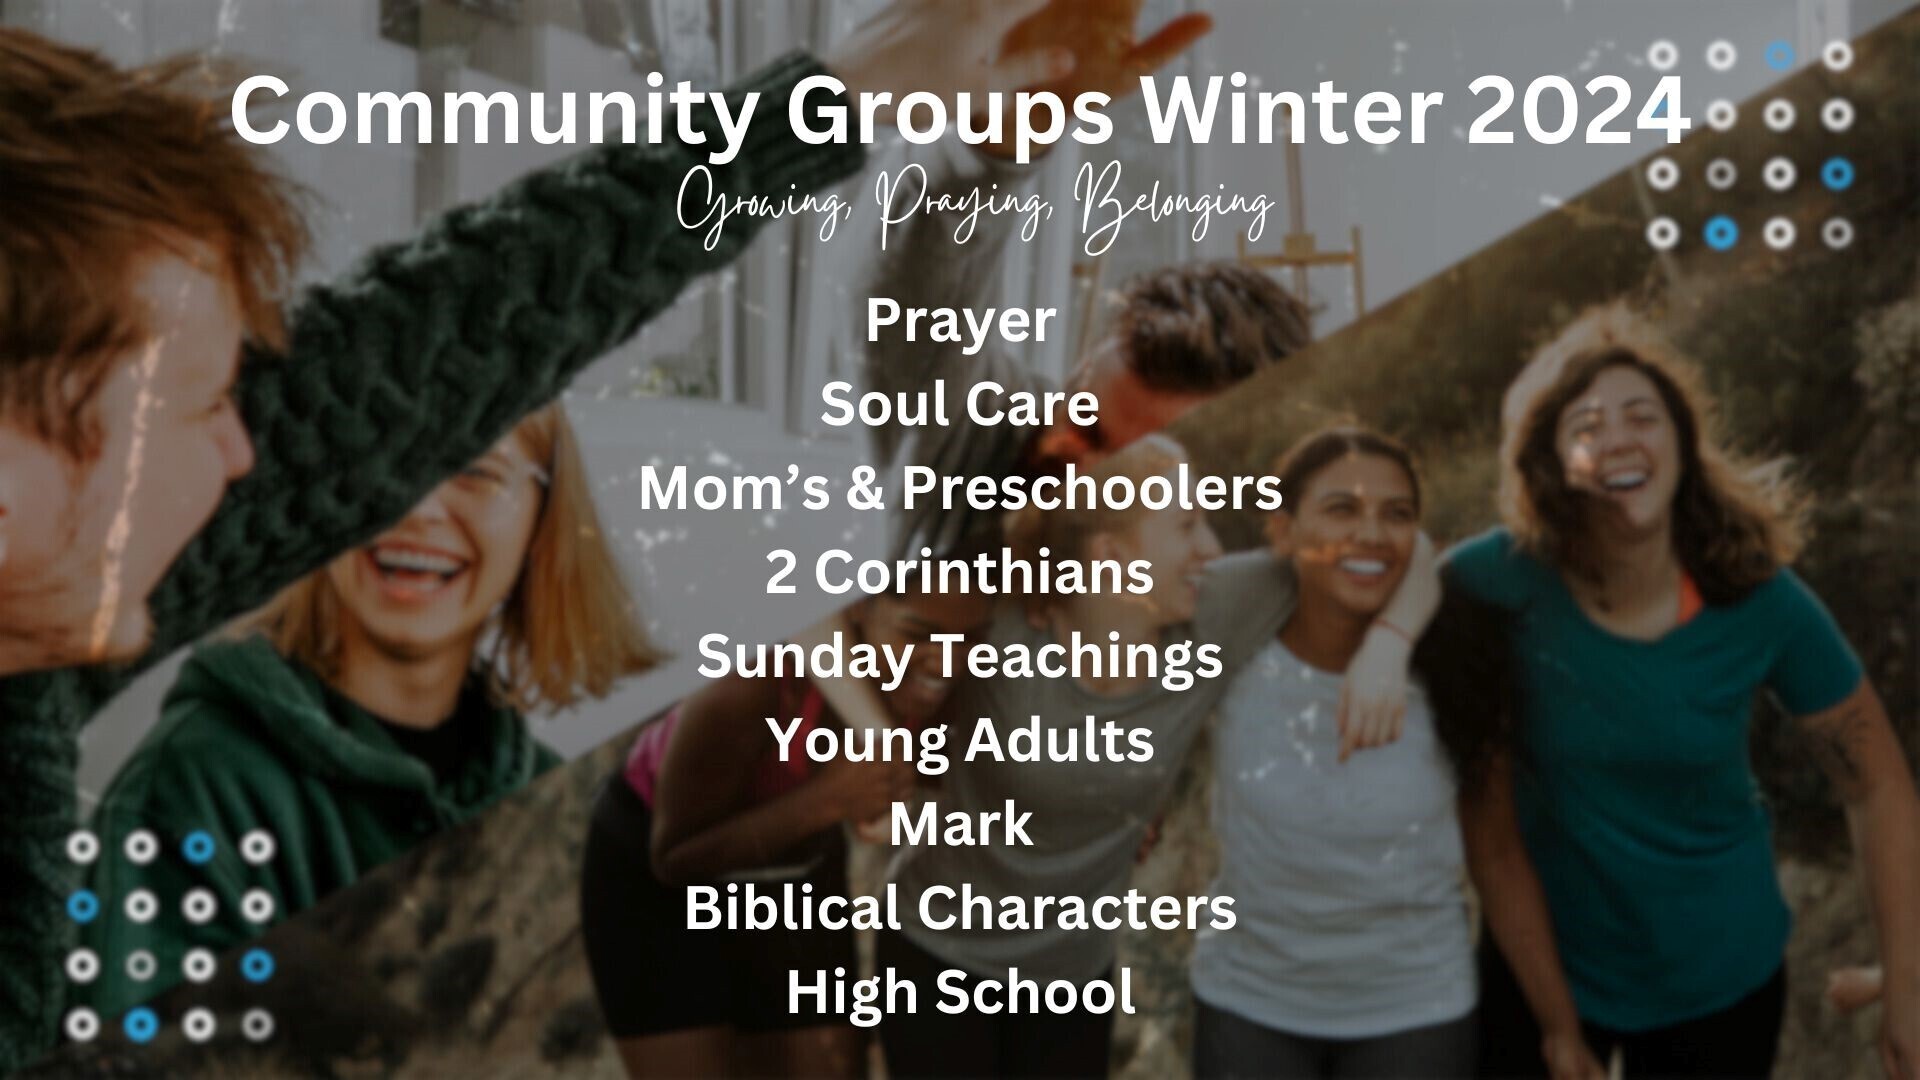 Invite people to join community groups